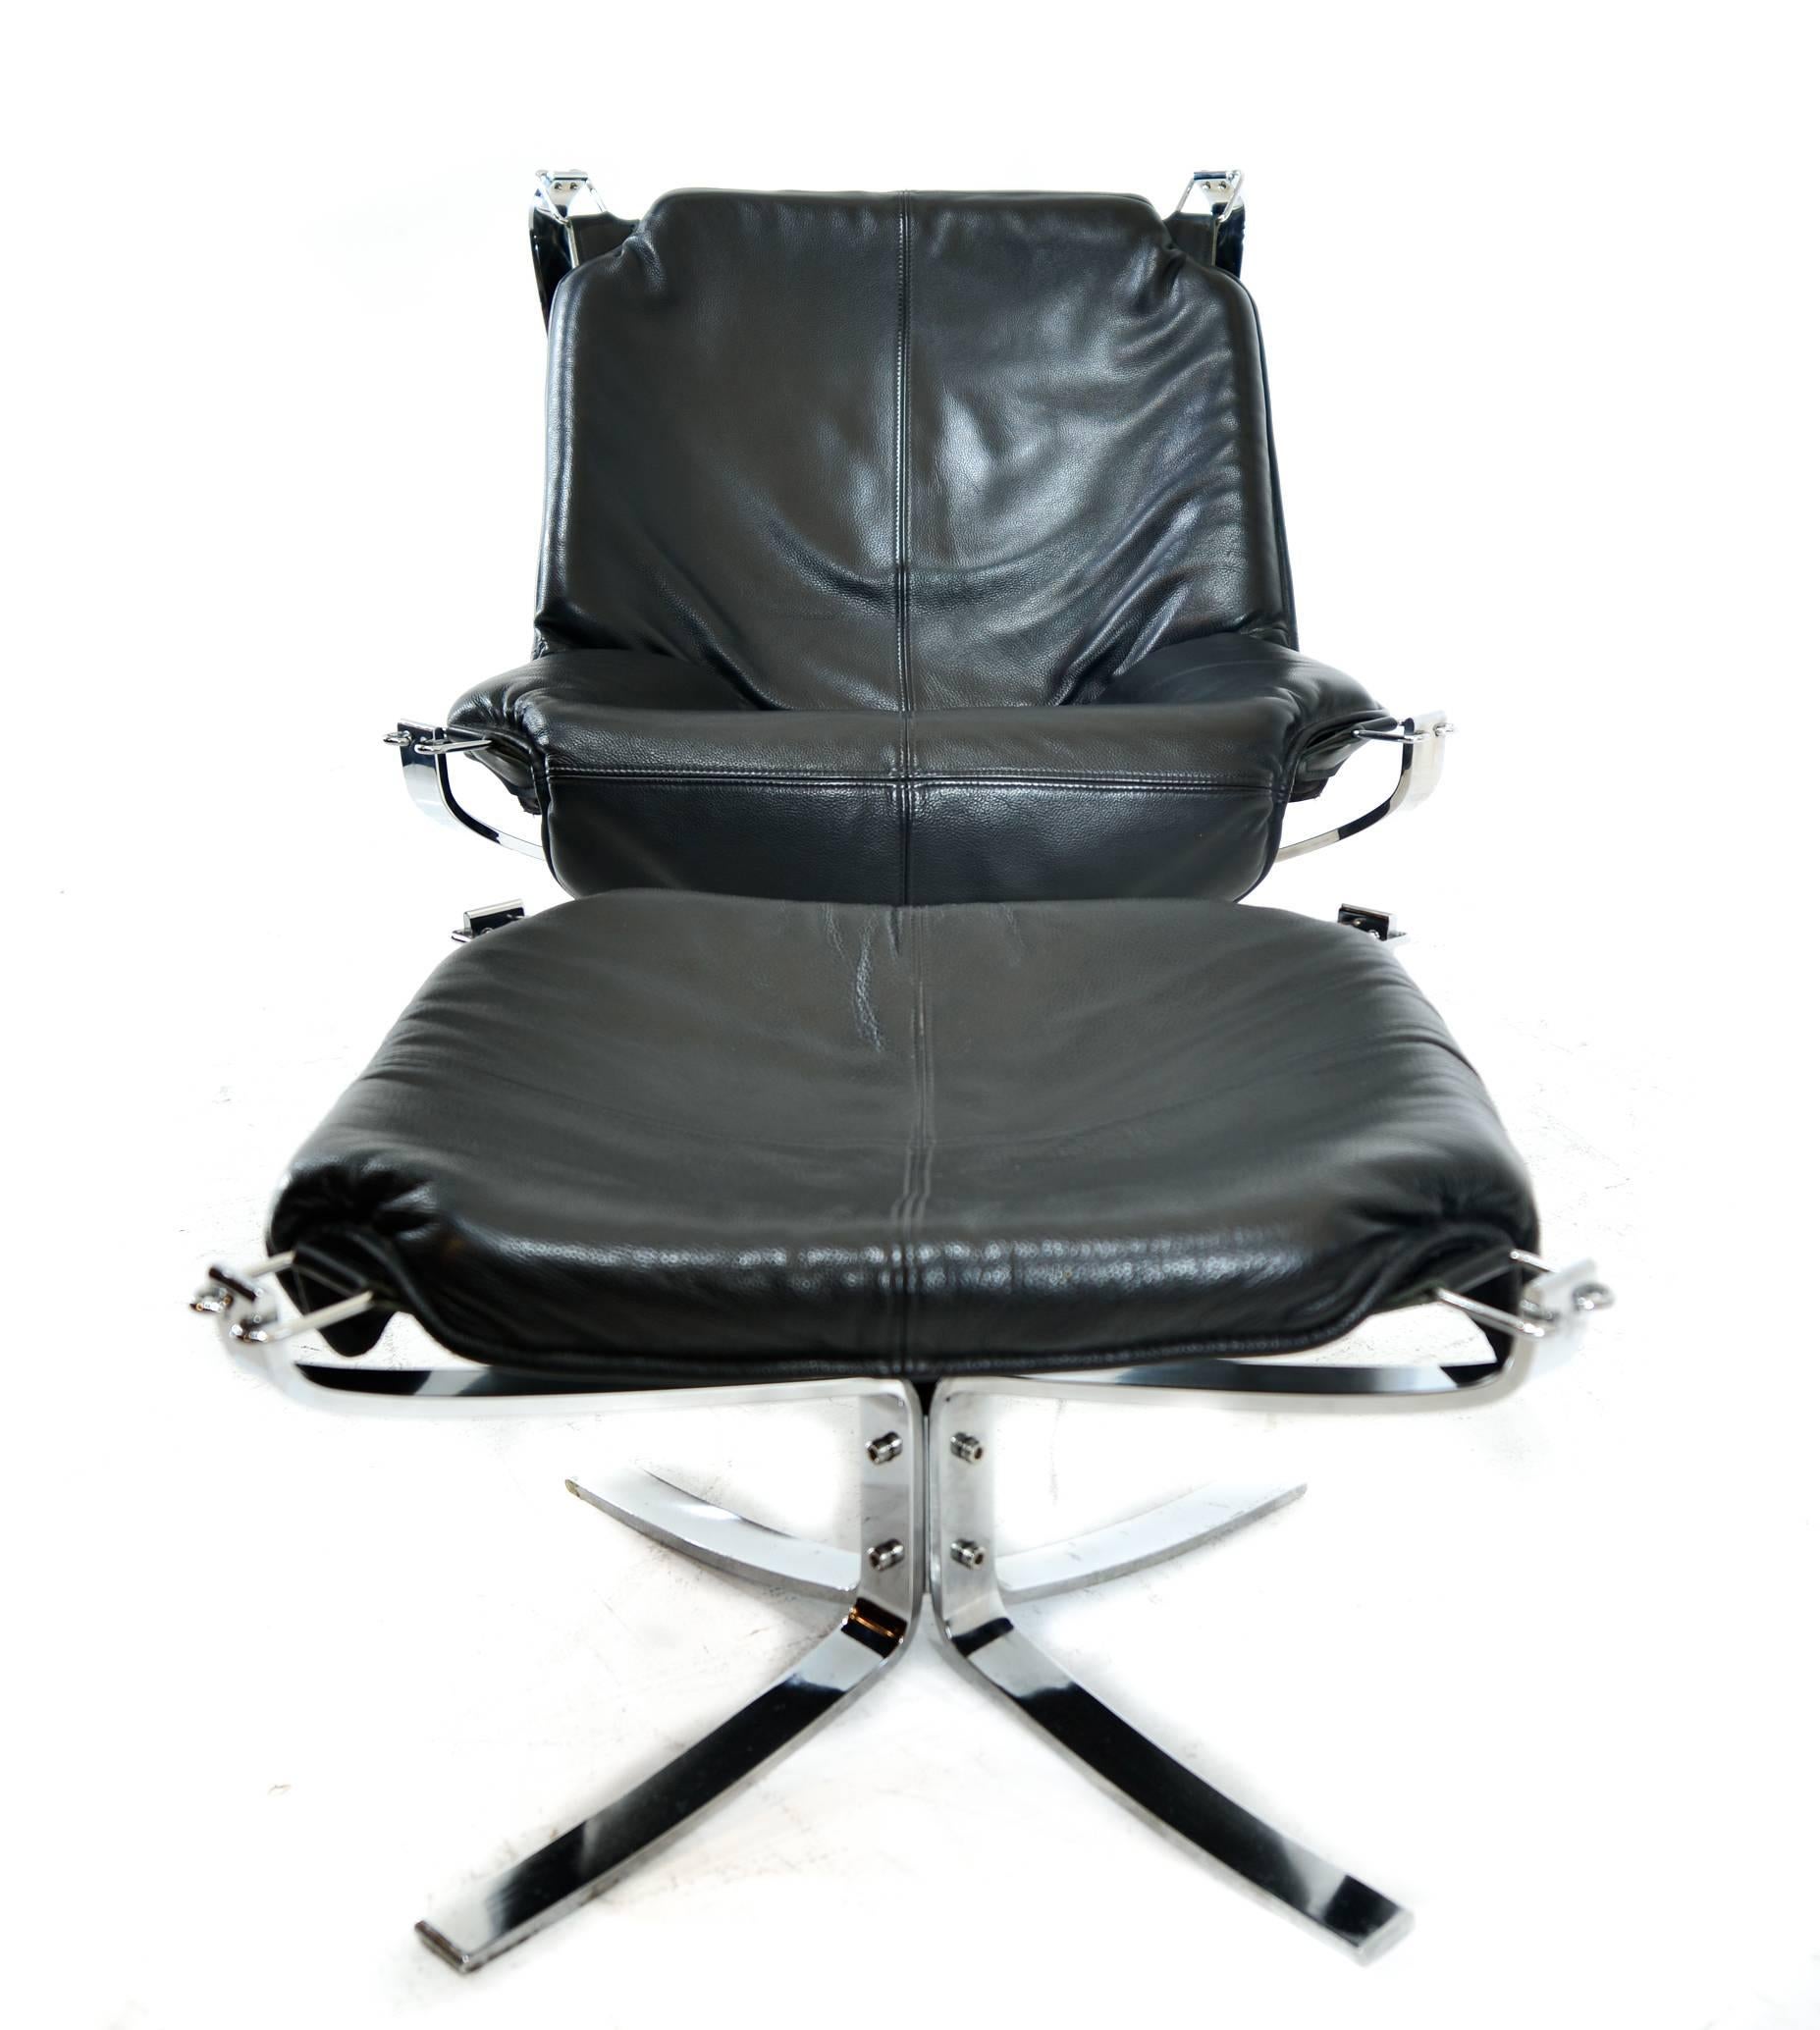 Norwegian Sigurd Resell Falcon Chair with Ottoman